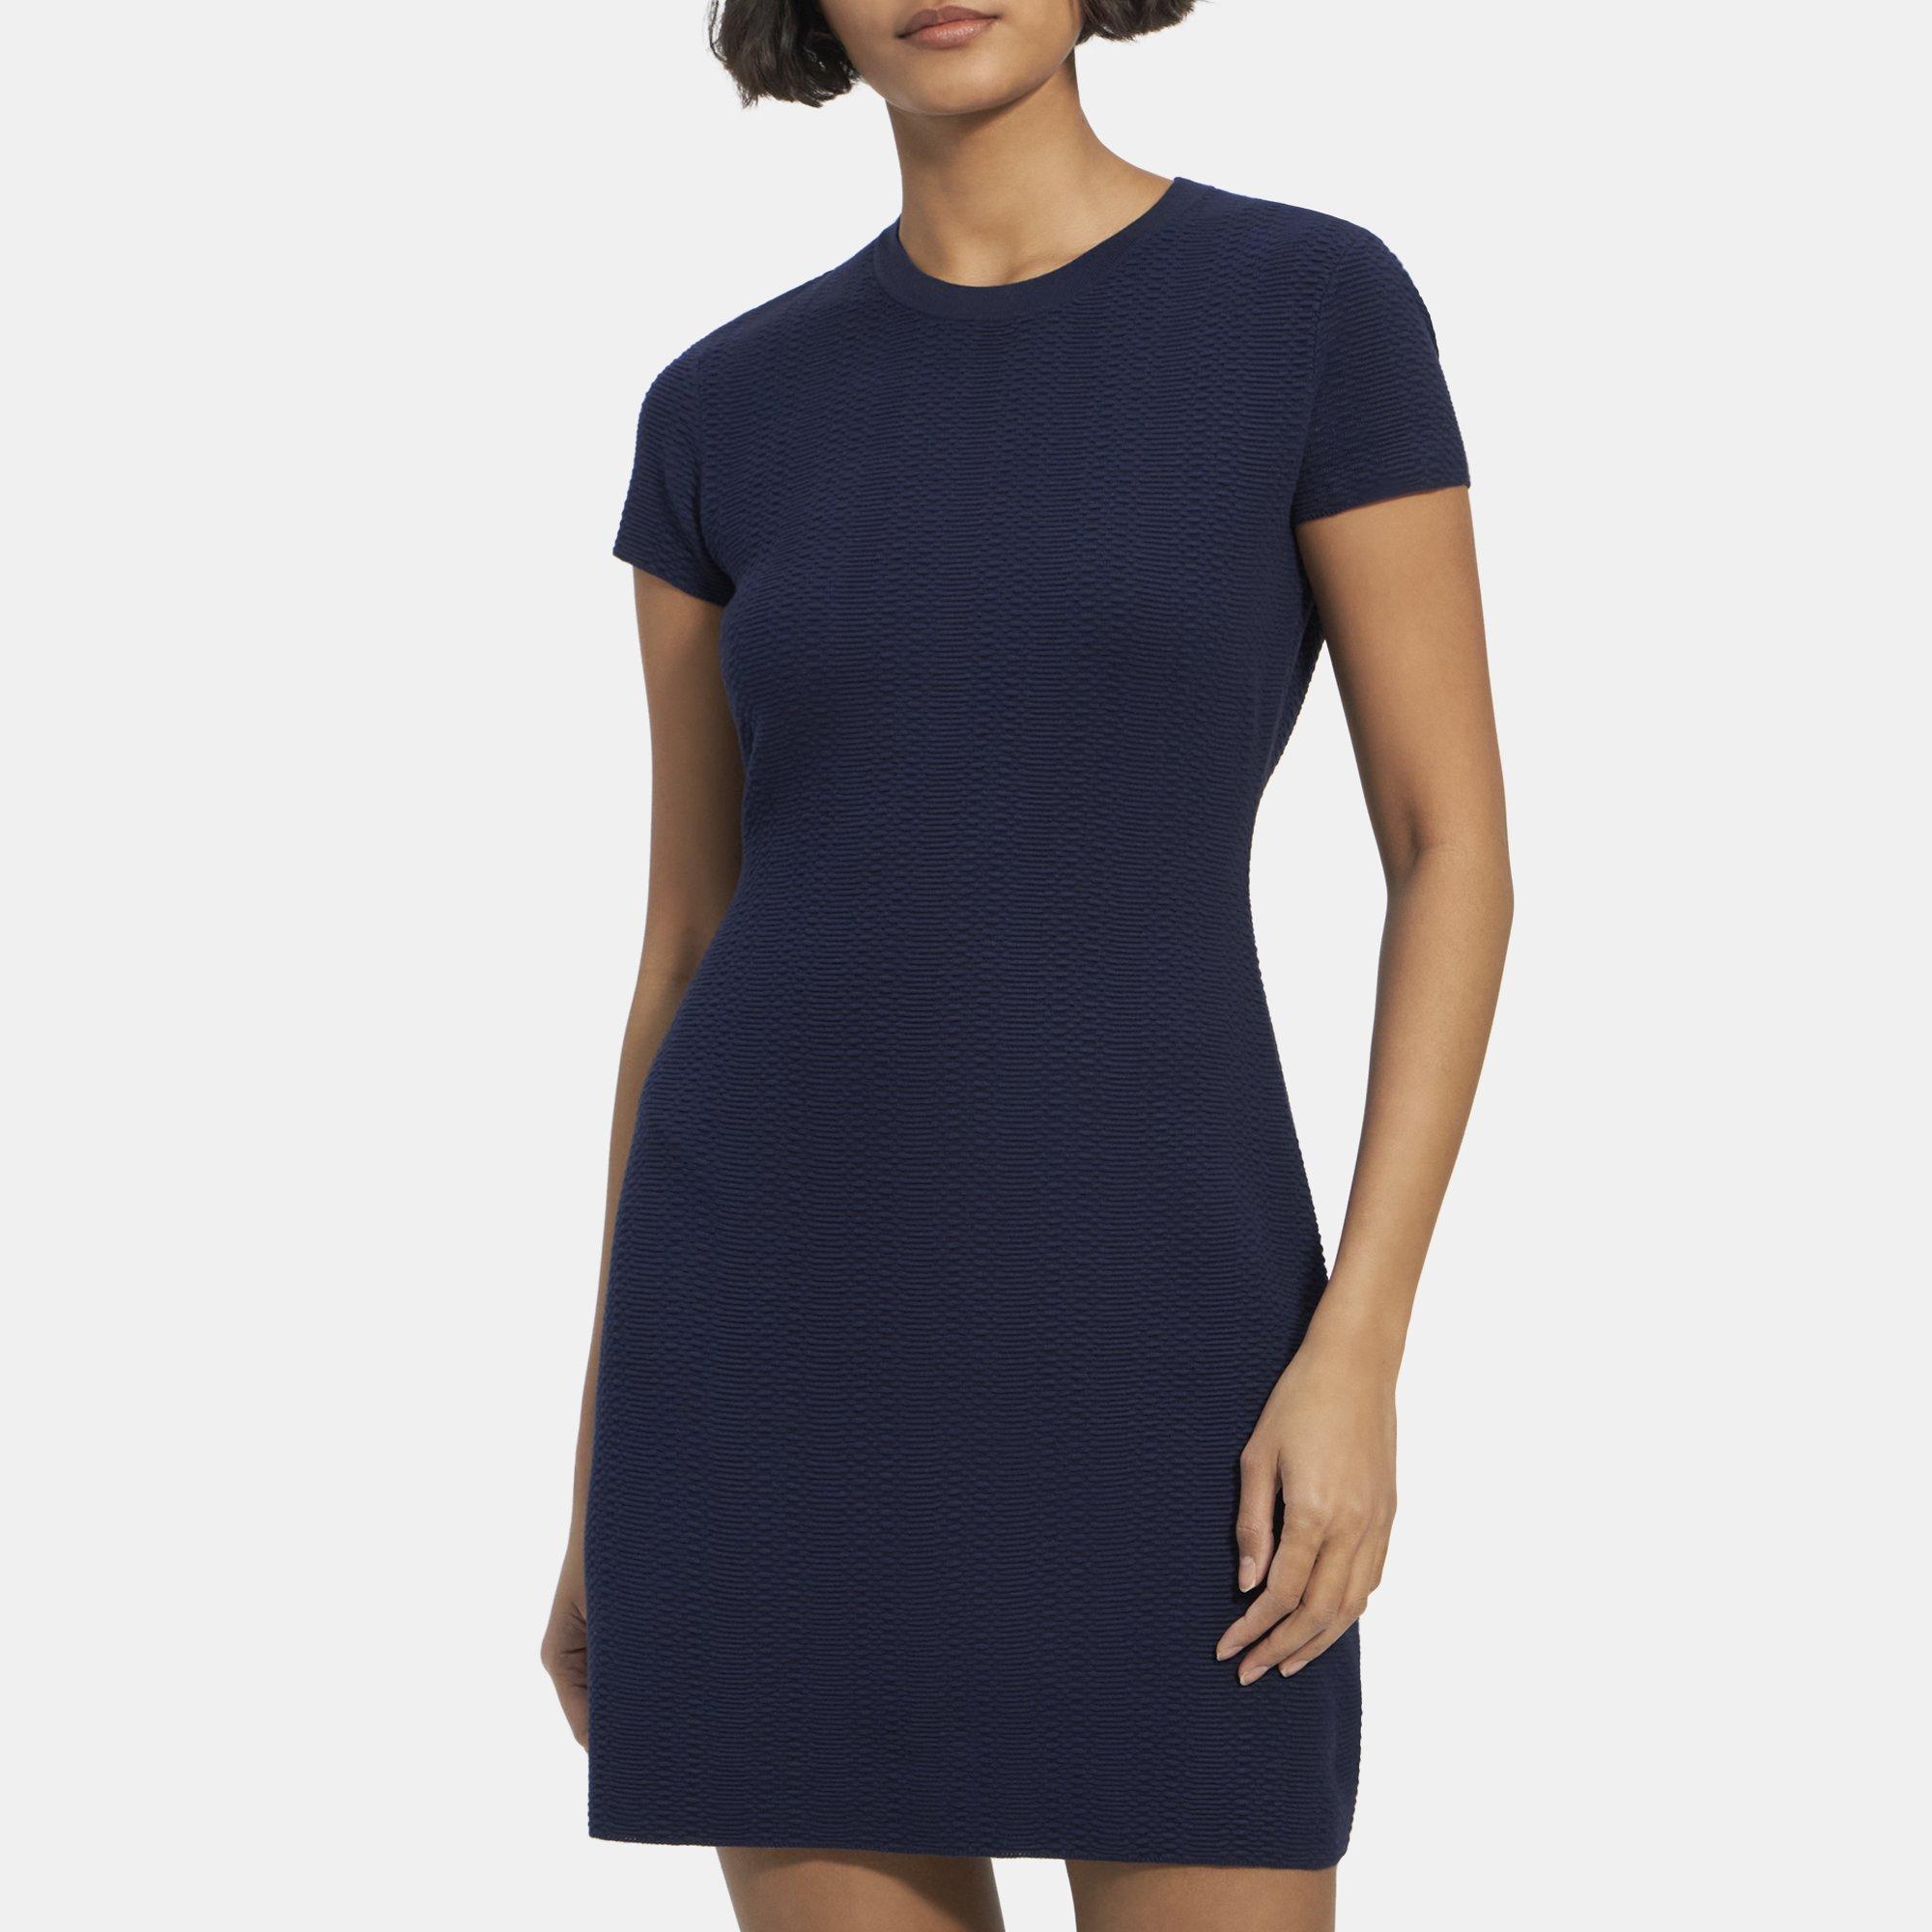 Theory Flare Dress in Stretch Viscose Knit